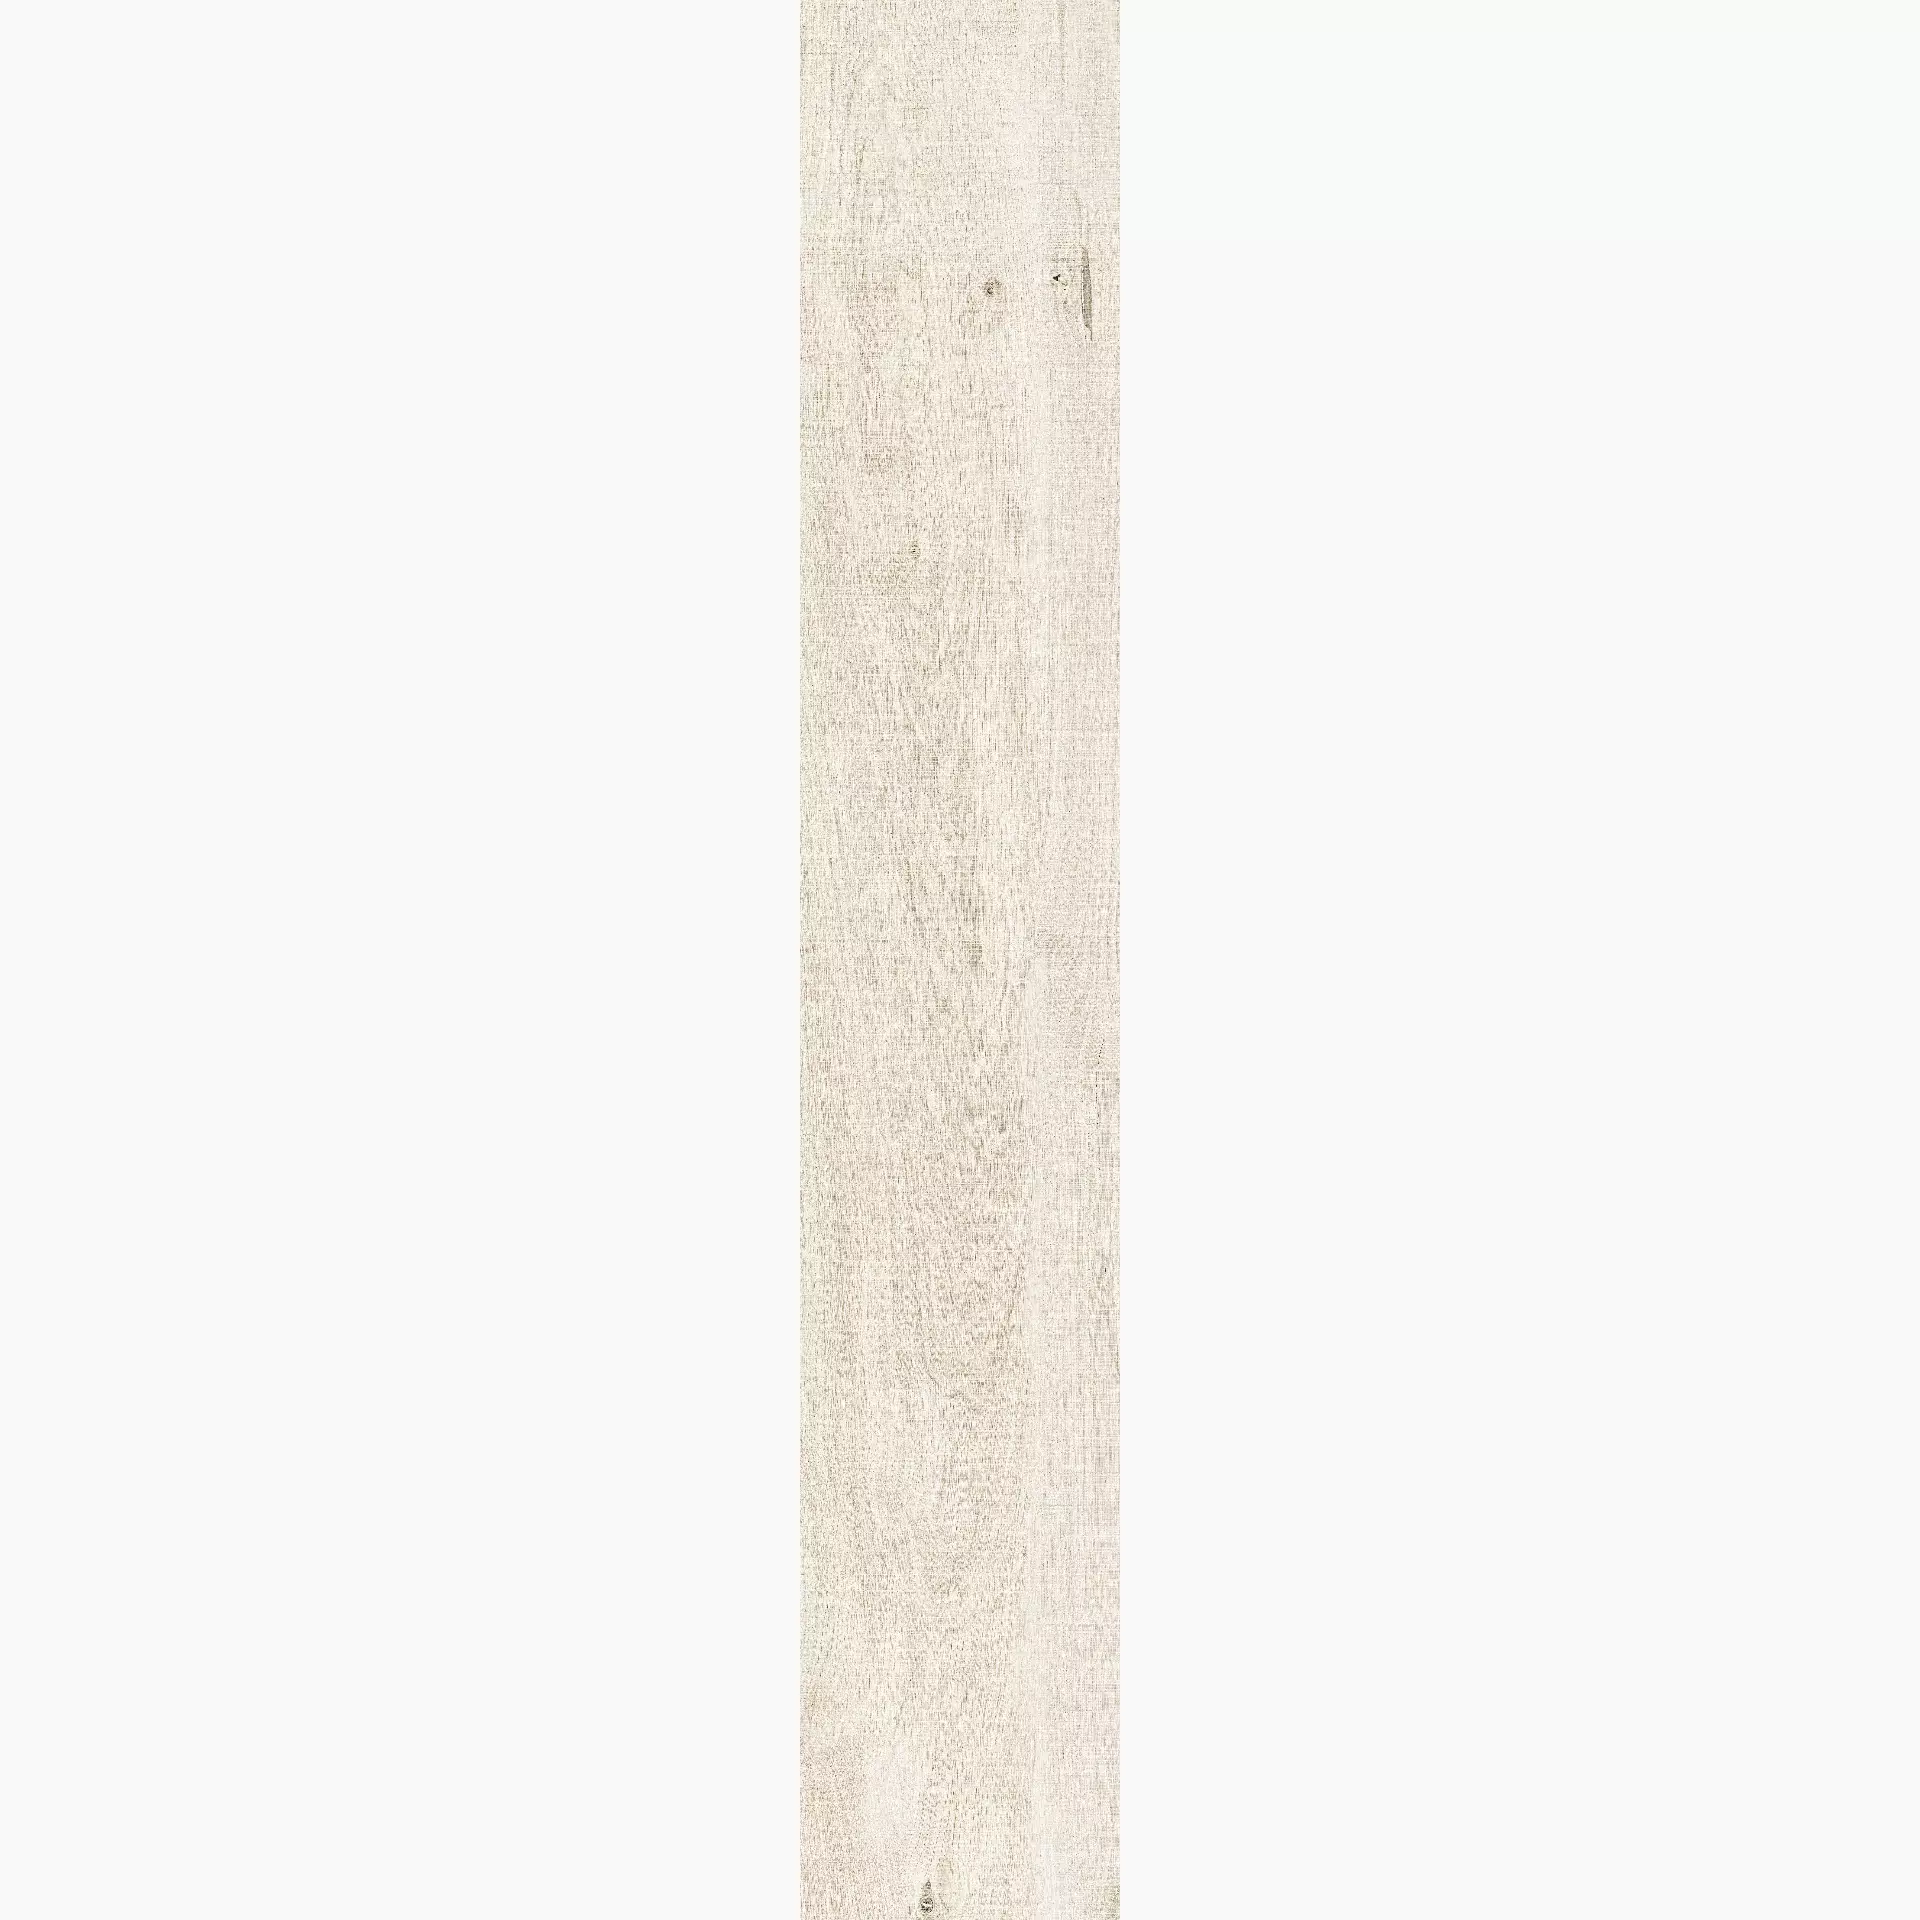 ABK Crossroad Wood White Naturale PF60000543 20x120cm rectified 8,5mm